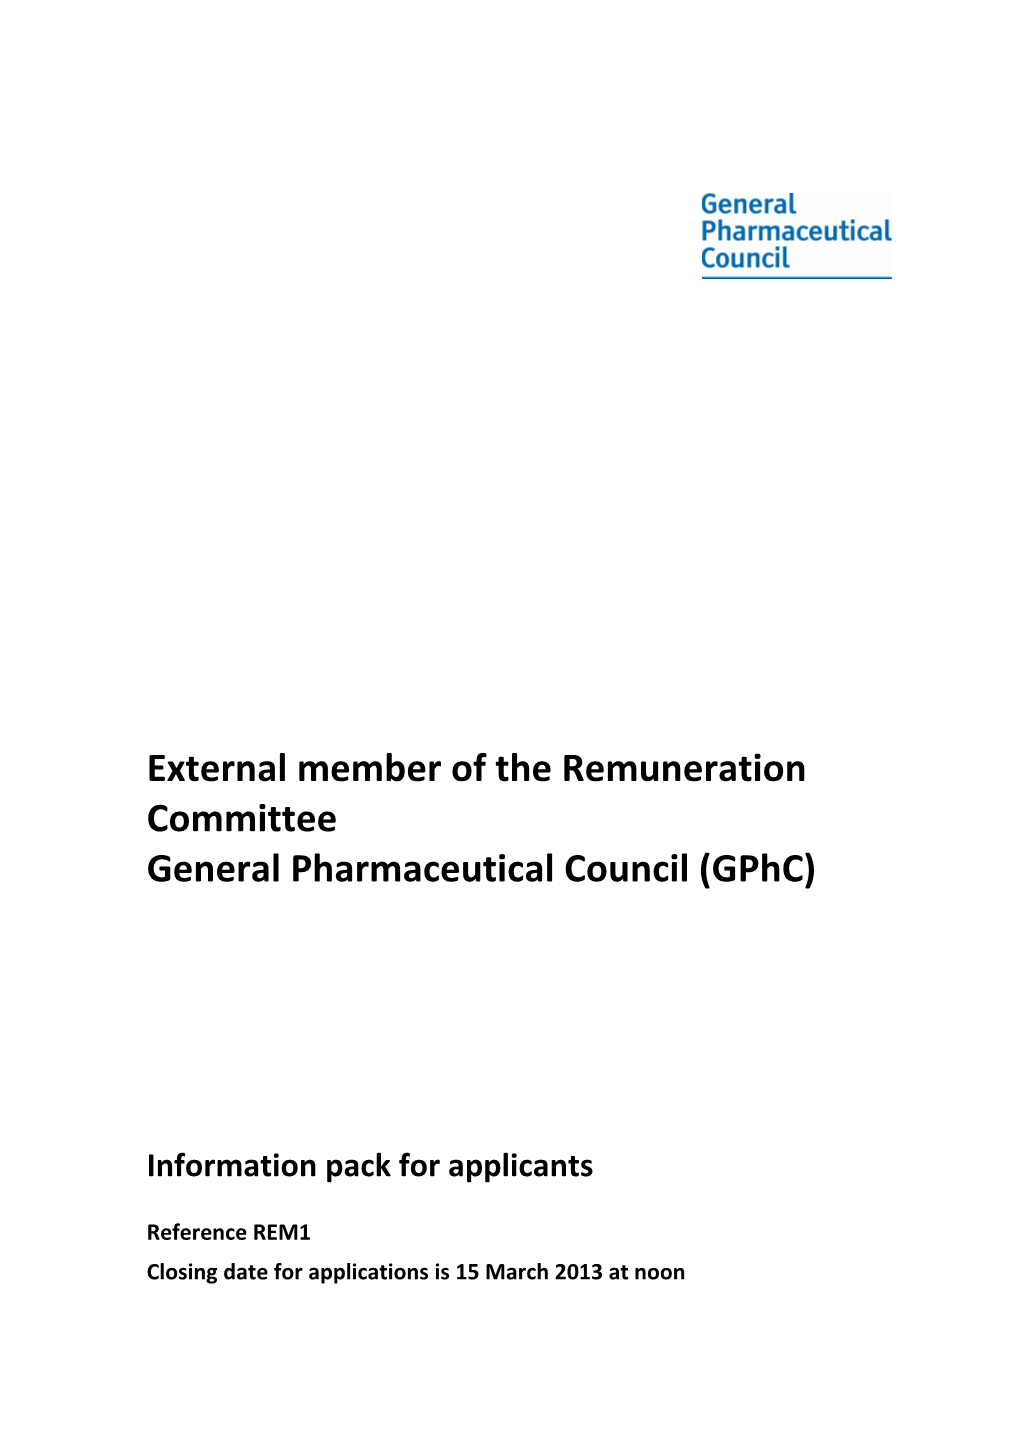 External Member of the Remuneration Committee